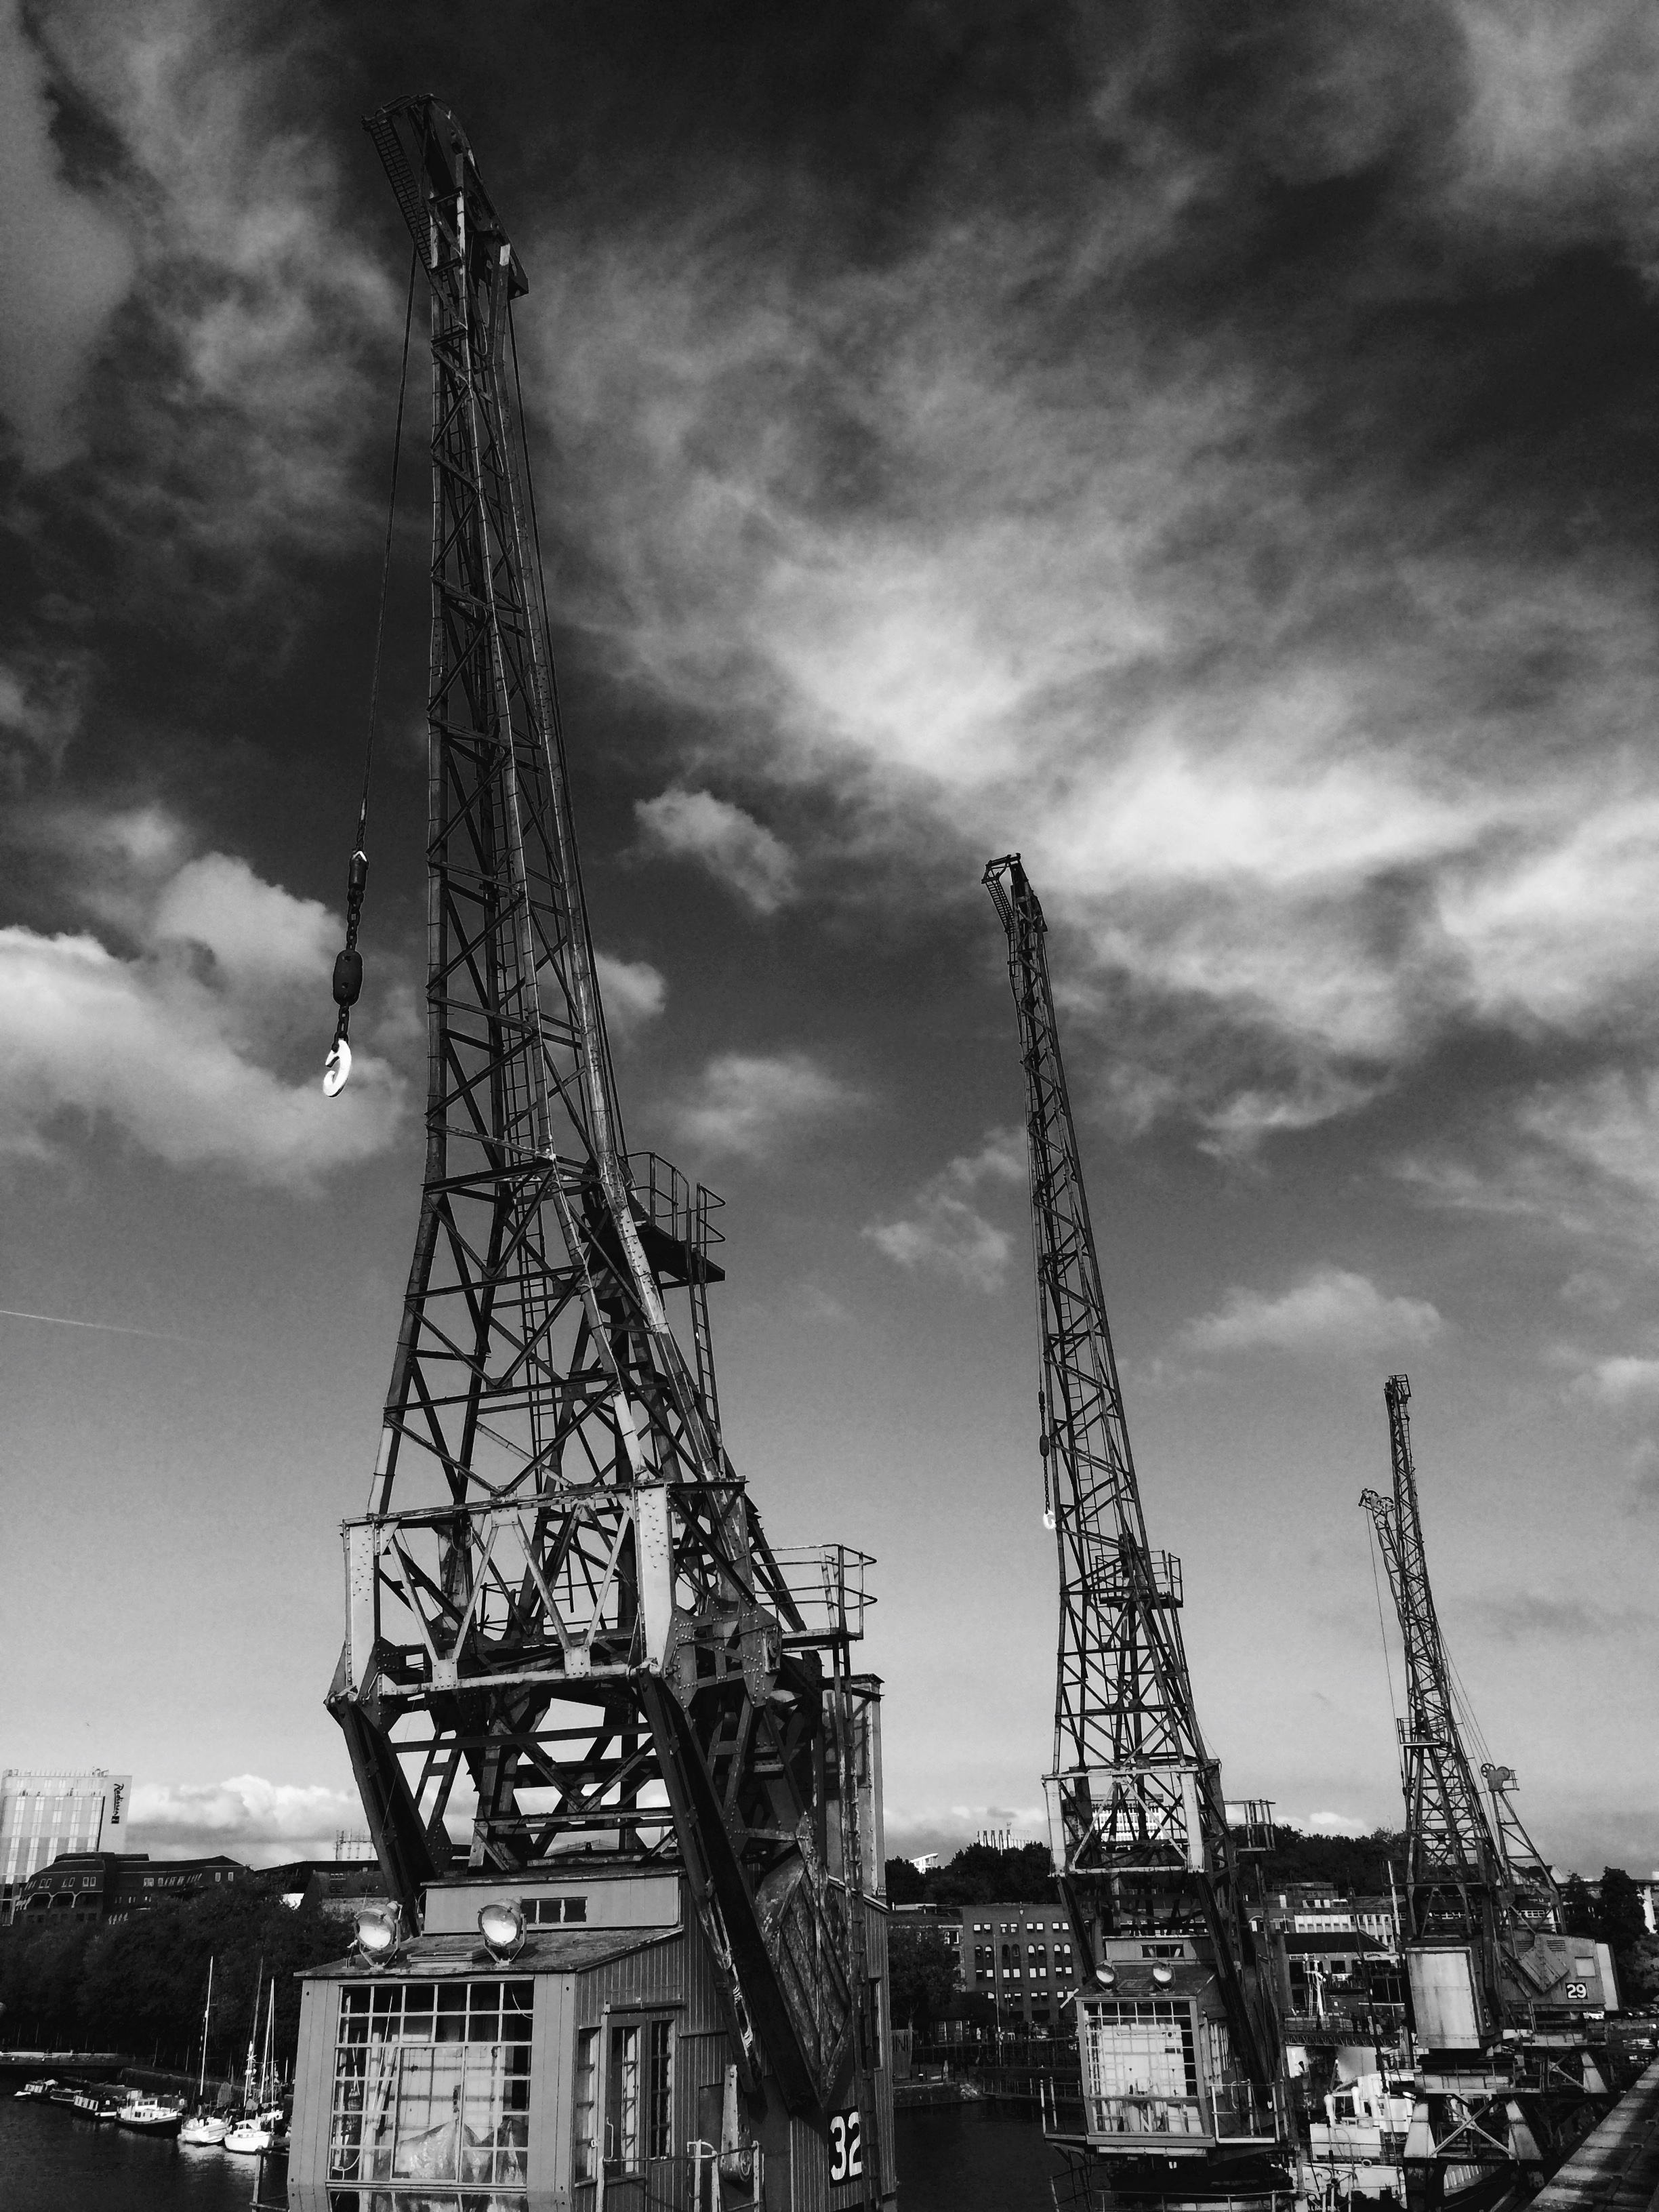 Image of one of the cranes formerly used for loading and unloading the ships in Bristol harbour